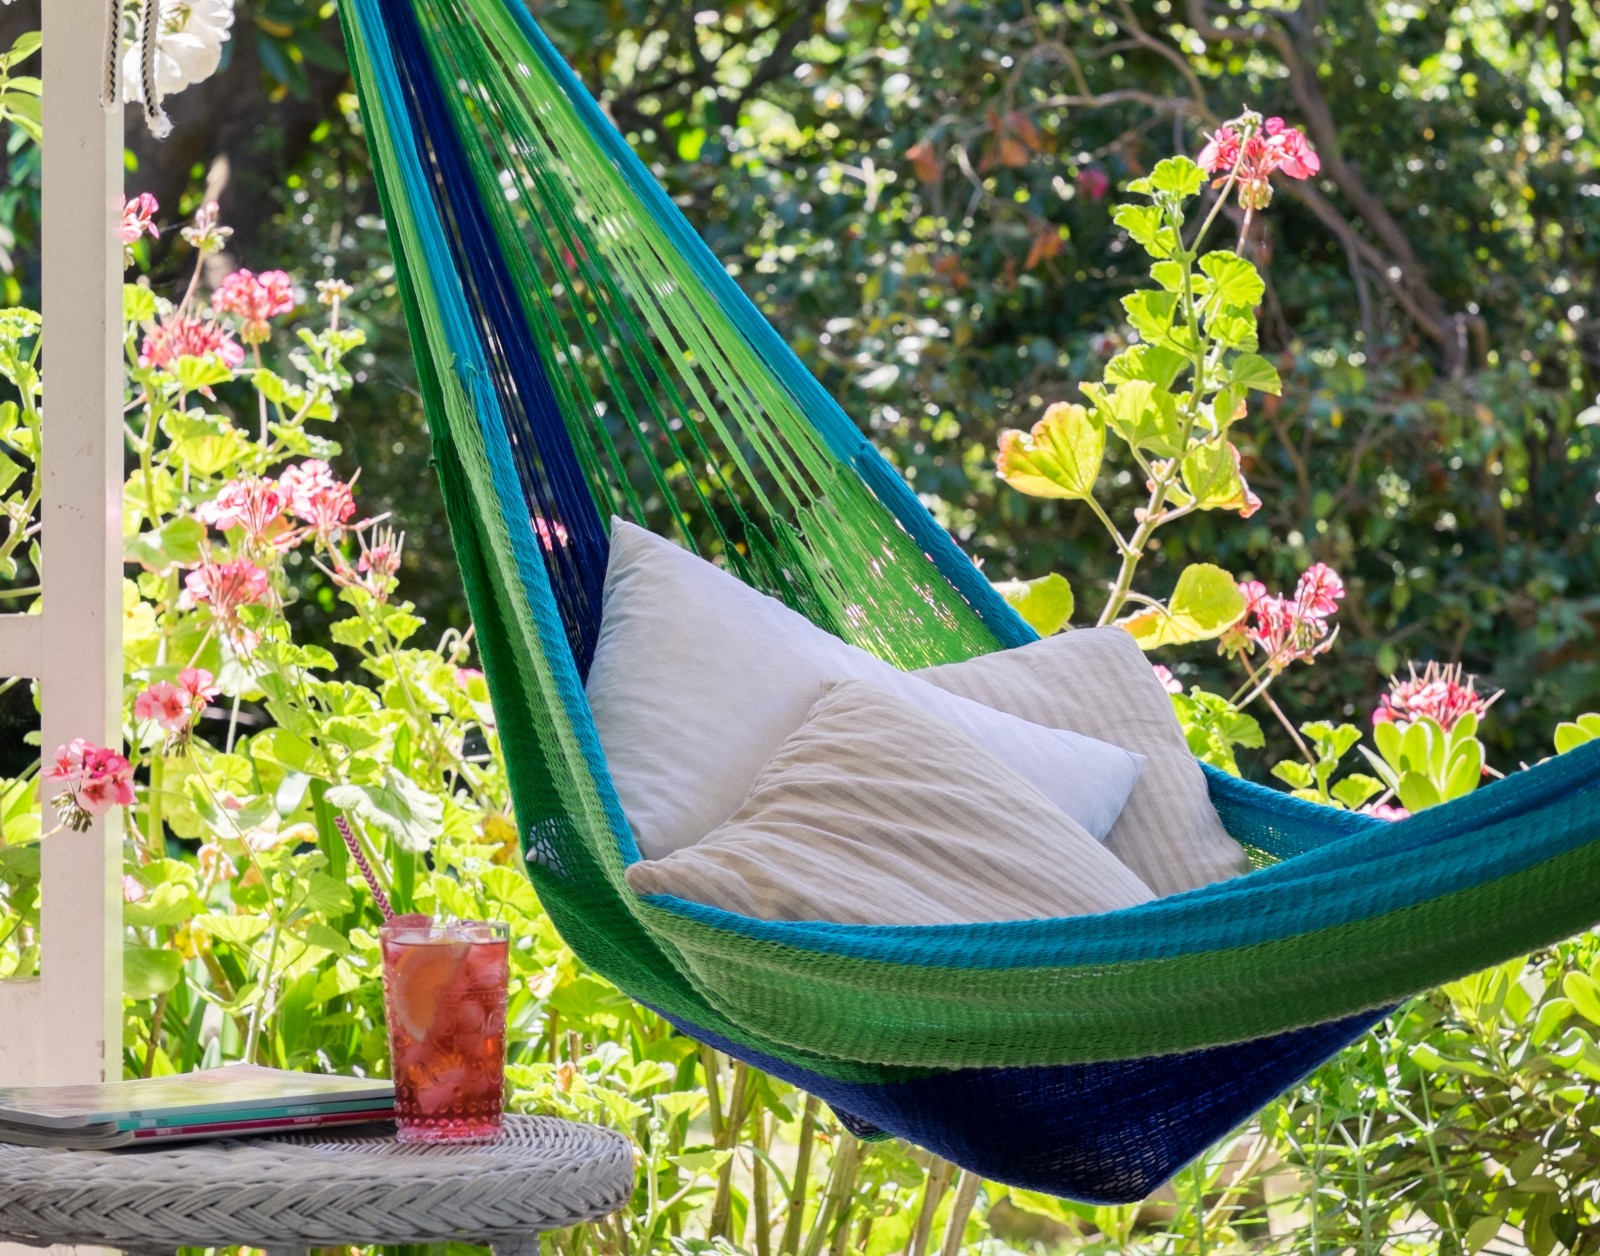 7 Ways to Enjoy the Outdoors at Home